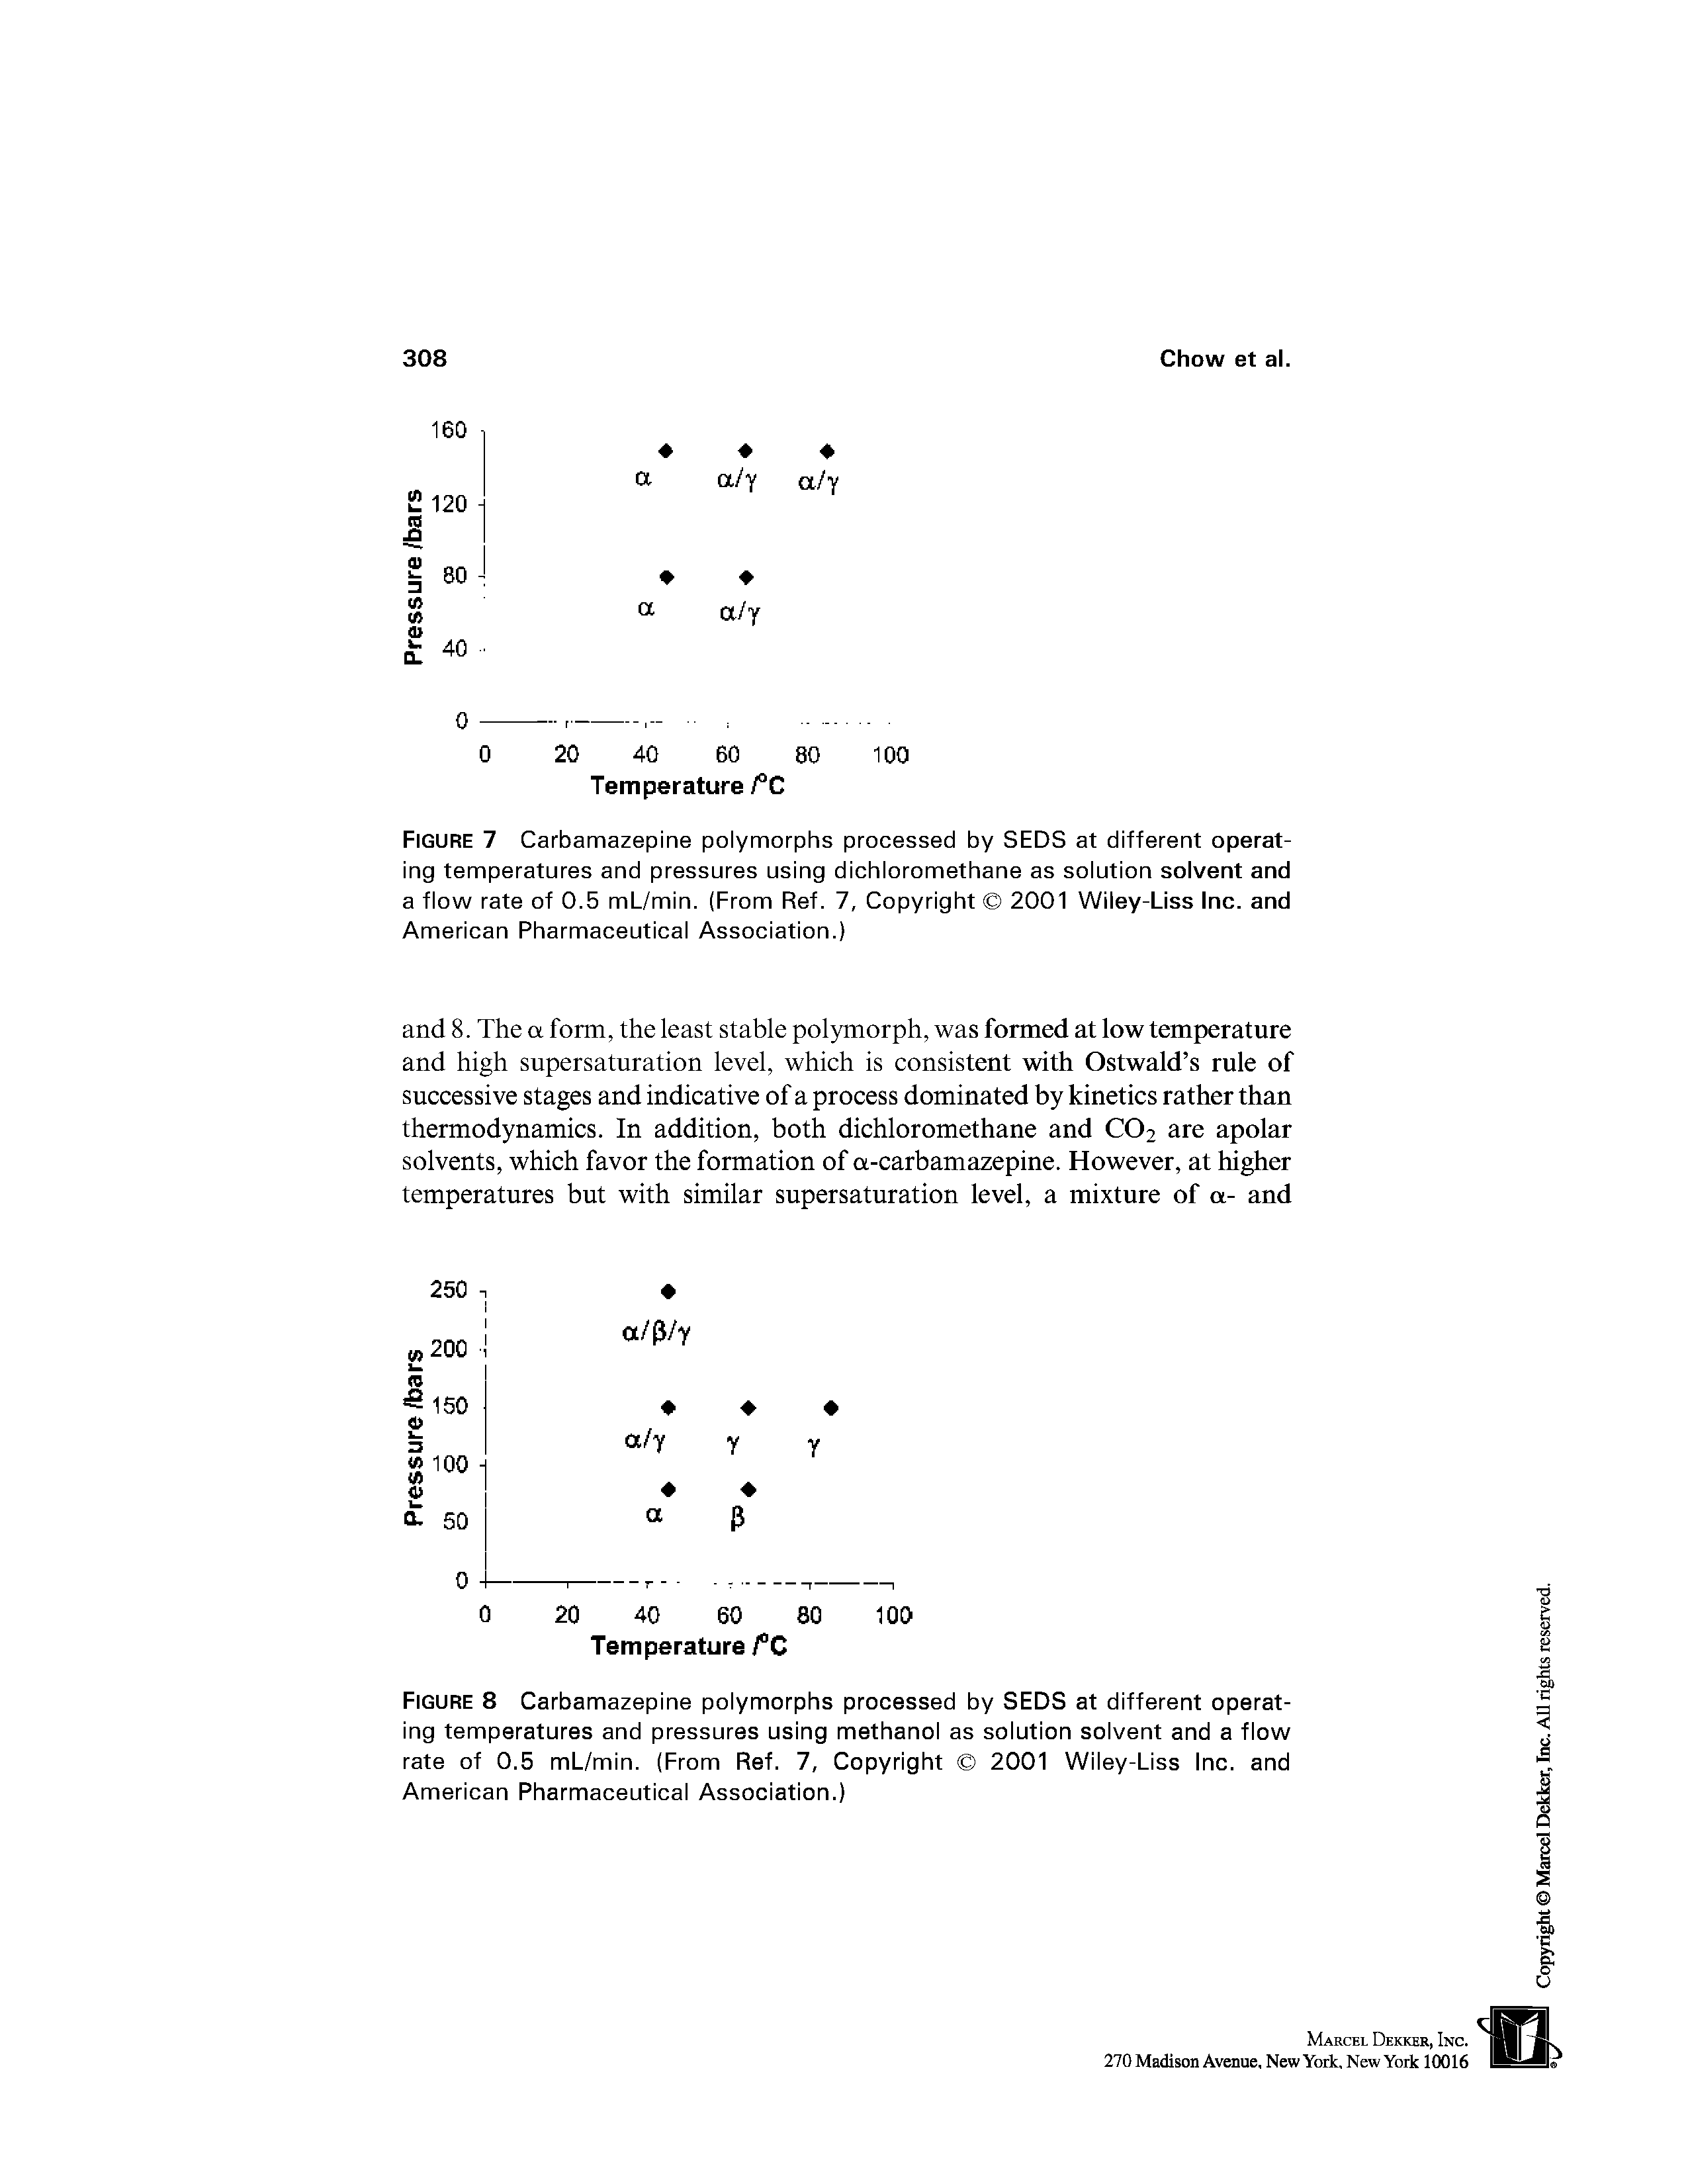 Figure 7 Carbamazepine polymorphs processed by SEDS at different operating temperatures and pressures using dichloromethane as solution solvent and a flow rate of 0.5 mL/min. (From Ref. 7, Copyright 2001 Wiley-Liss Inc. and American Pharmaceutical Association.)...